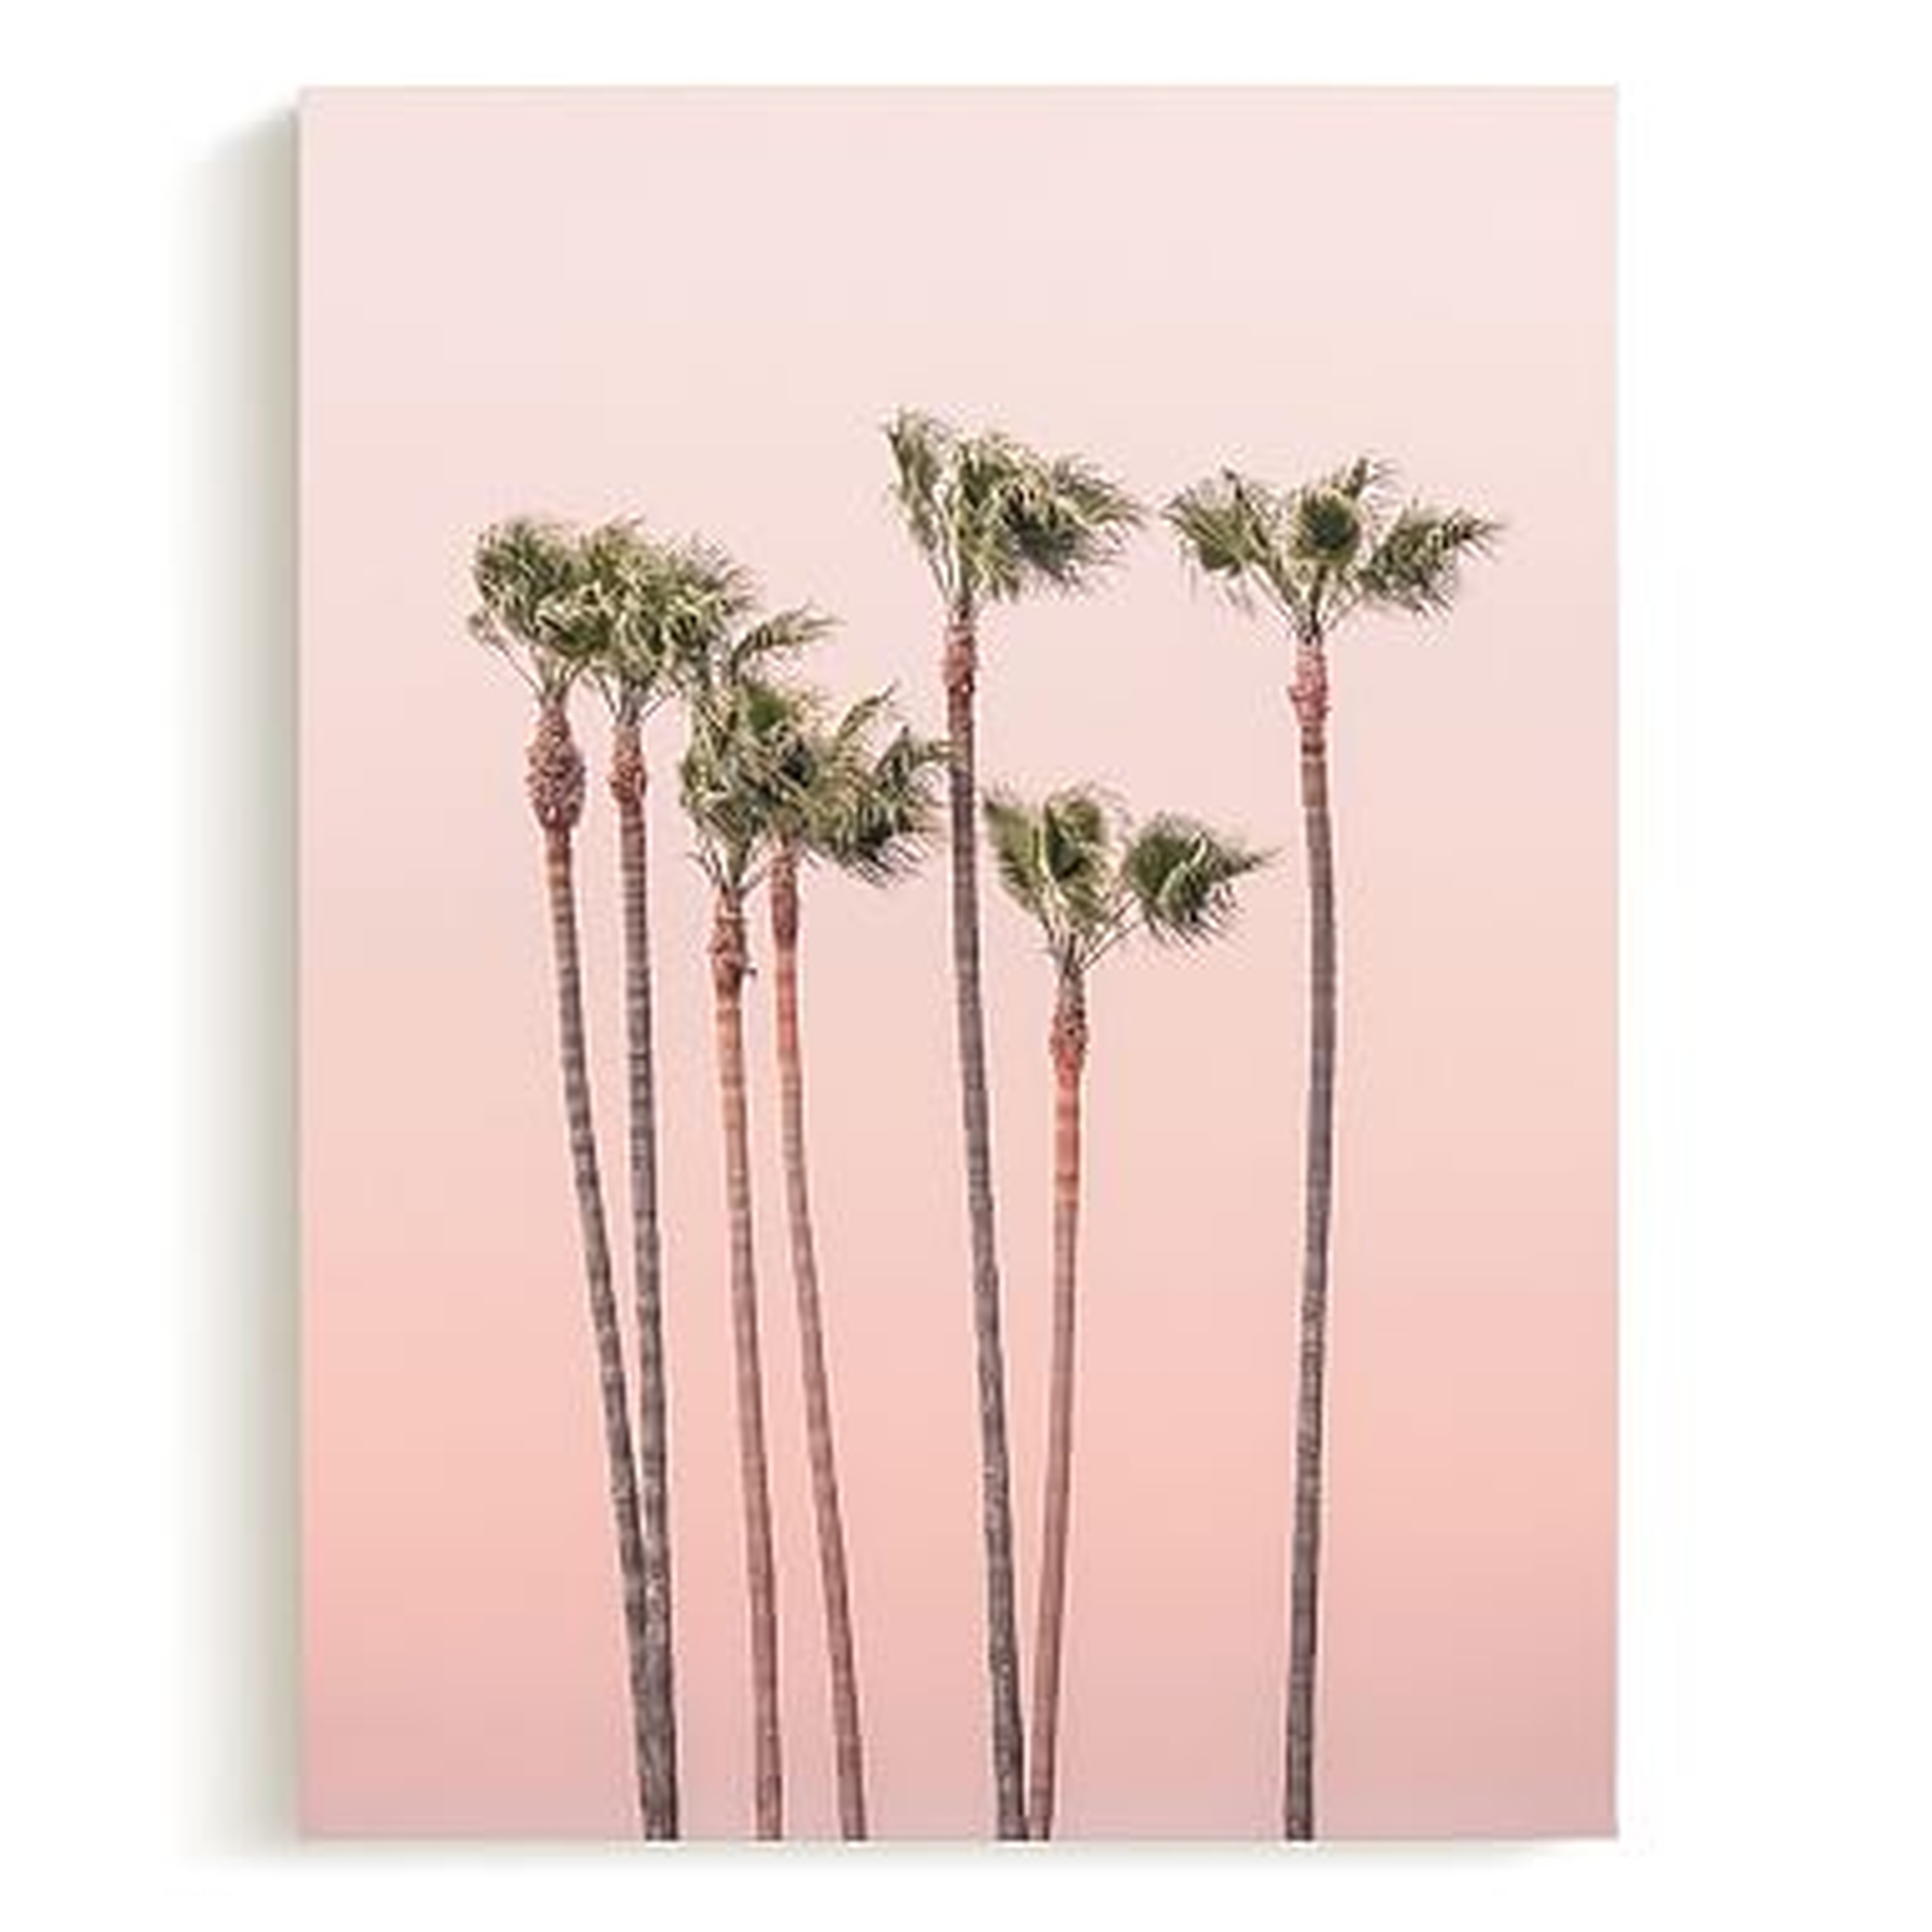 Minted(R) Seven Palmtrees Canvas,18x24 - Pottery Barn Teen